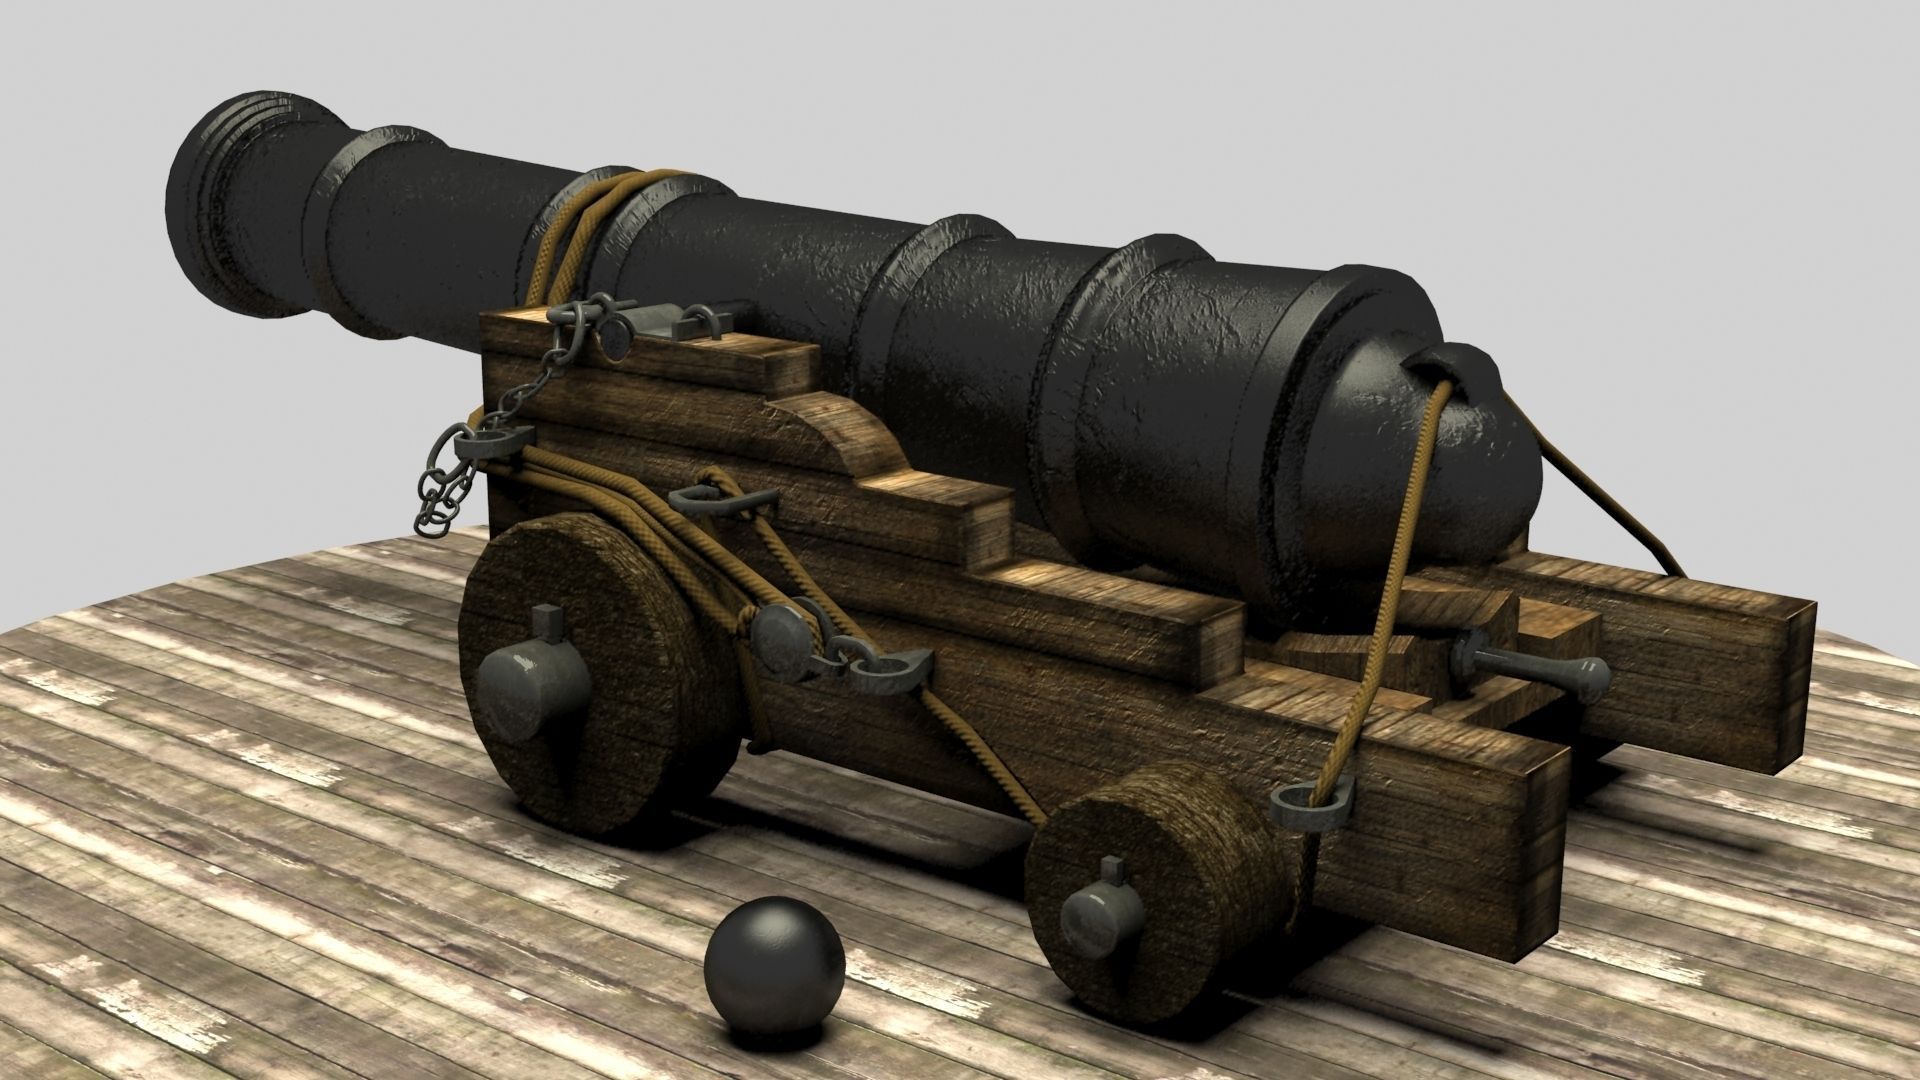 Pirate Cannon 3D model | CGTrader